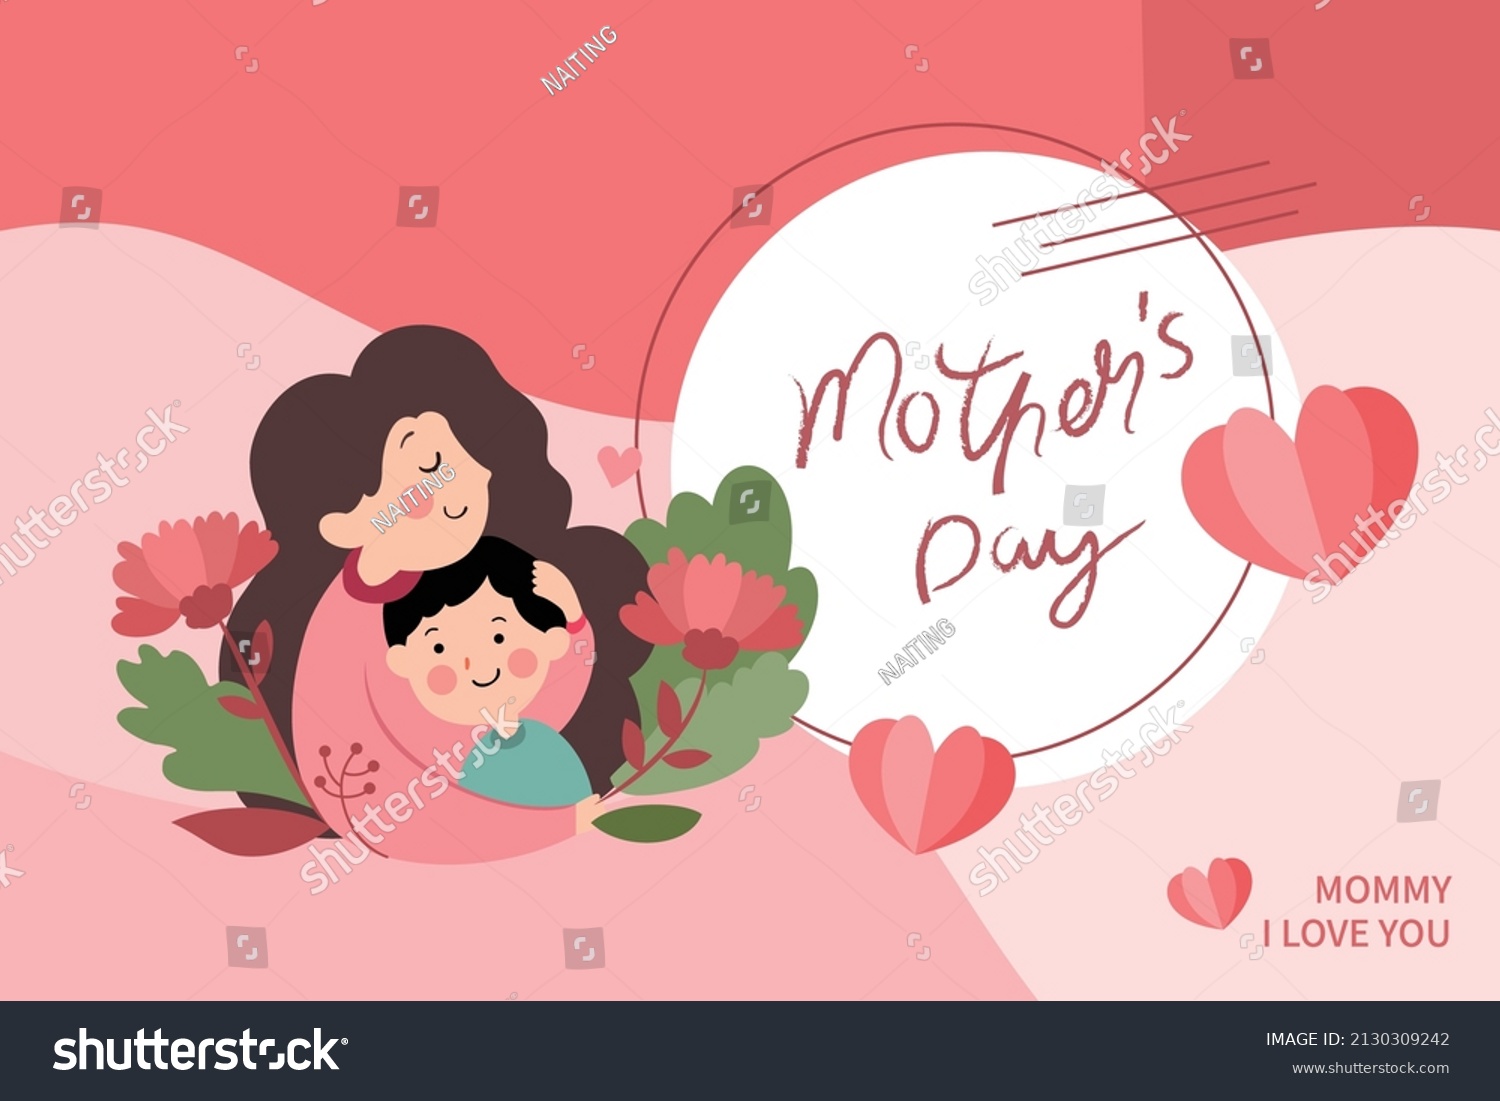 Vector illustration of joyous celebration of Happy Mother's Day, mother holding baby surrounded by flowers #2130309242